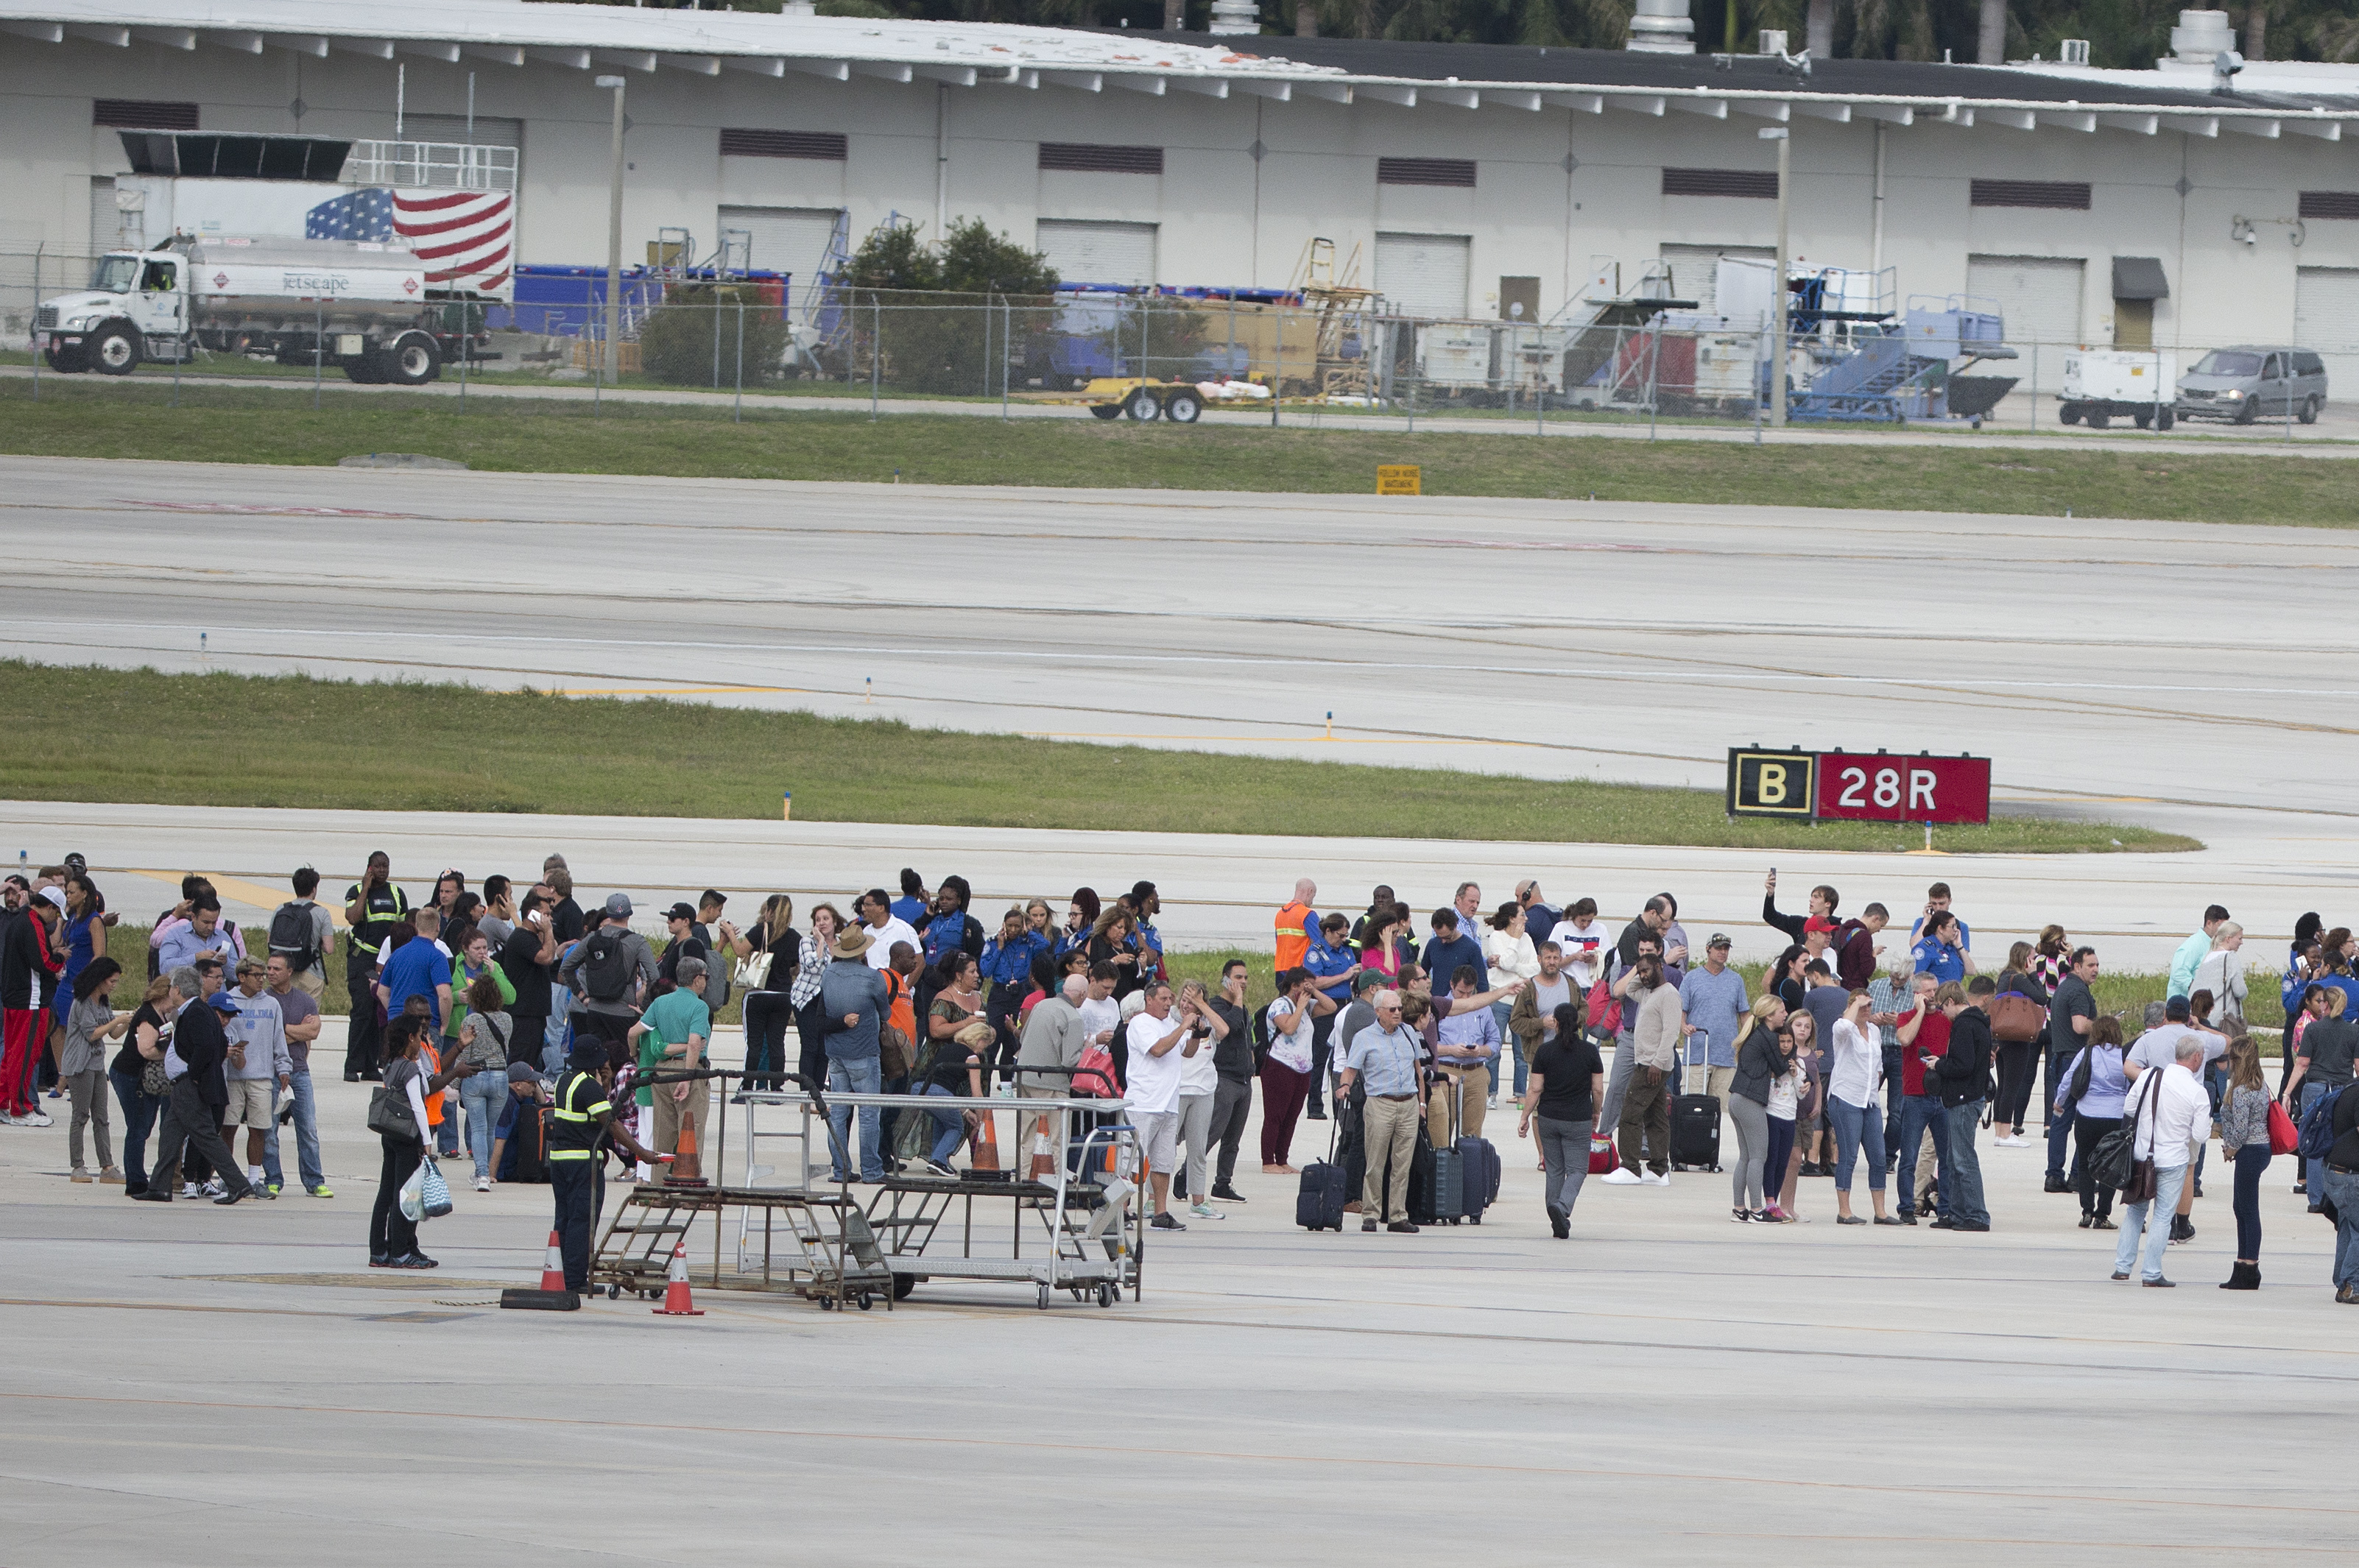 People stand on the tarmac at Fort Lauderdale–Hollywood International Airport, after a gunman opened fire in the baggage claim area at the airport killing several people and wounding others before being taken into custody Friday, Jan. 6, 2017, in Fort Lauderdale, Fla. (AP Photo/Wilfredo Lee)